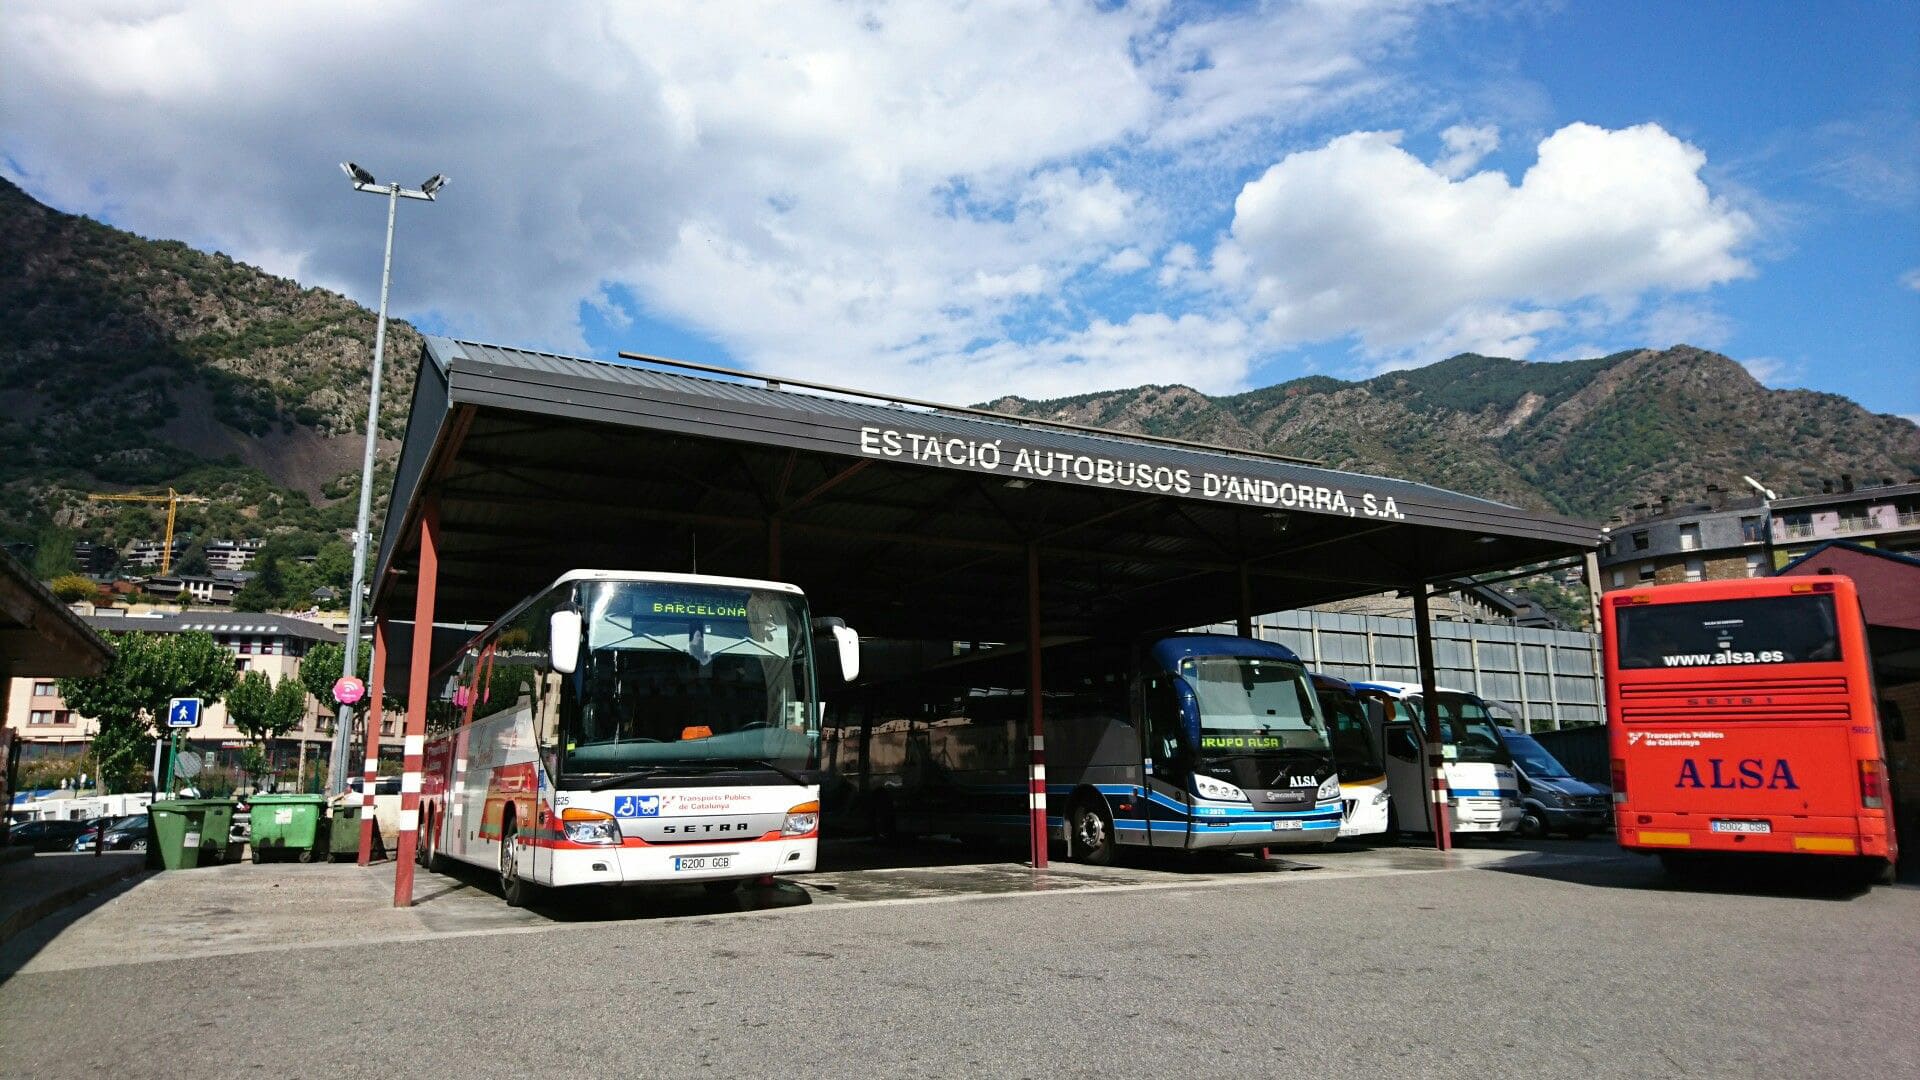 Andorra Transfer Services: Get There by Bus, Taxi or Private Car